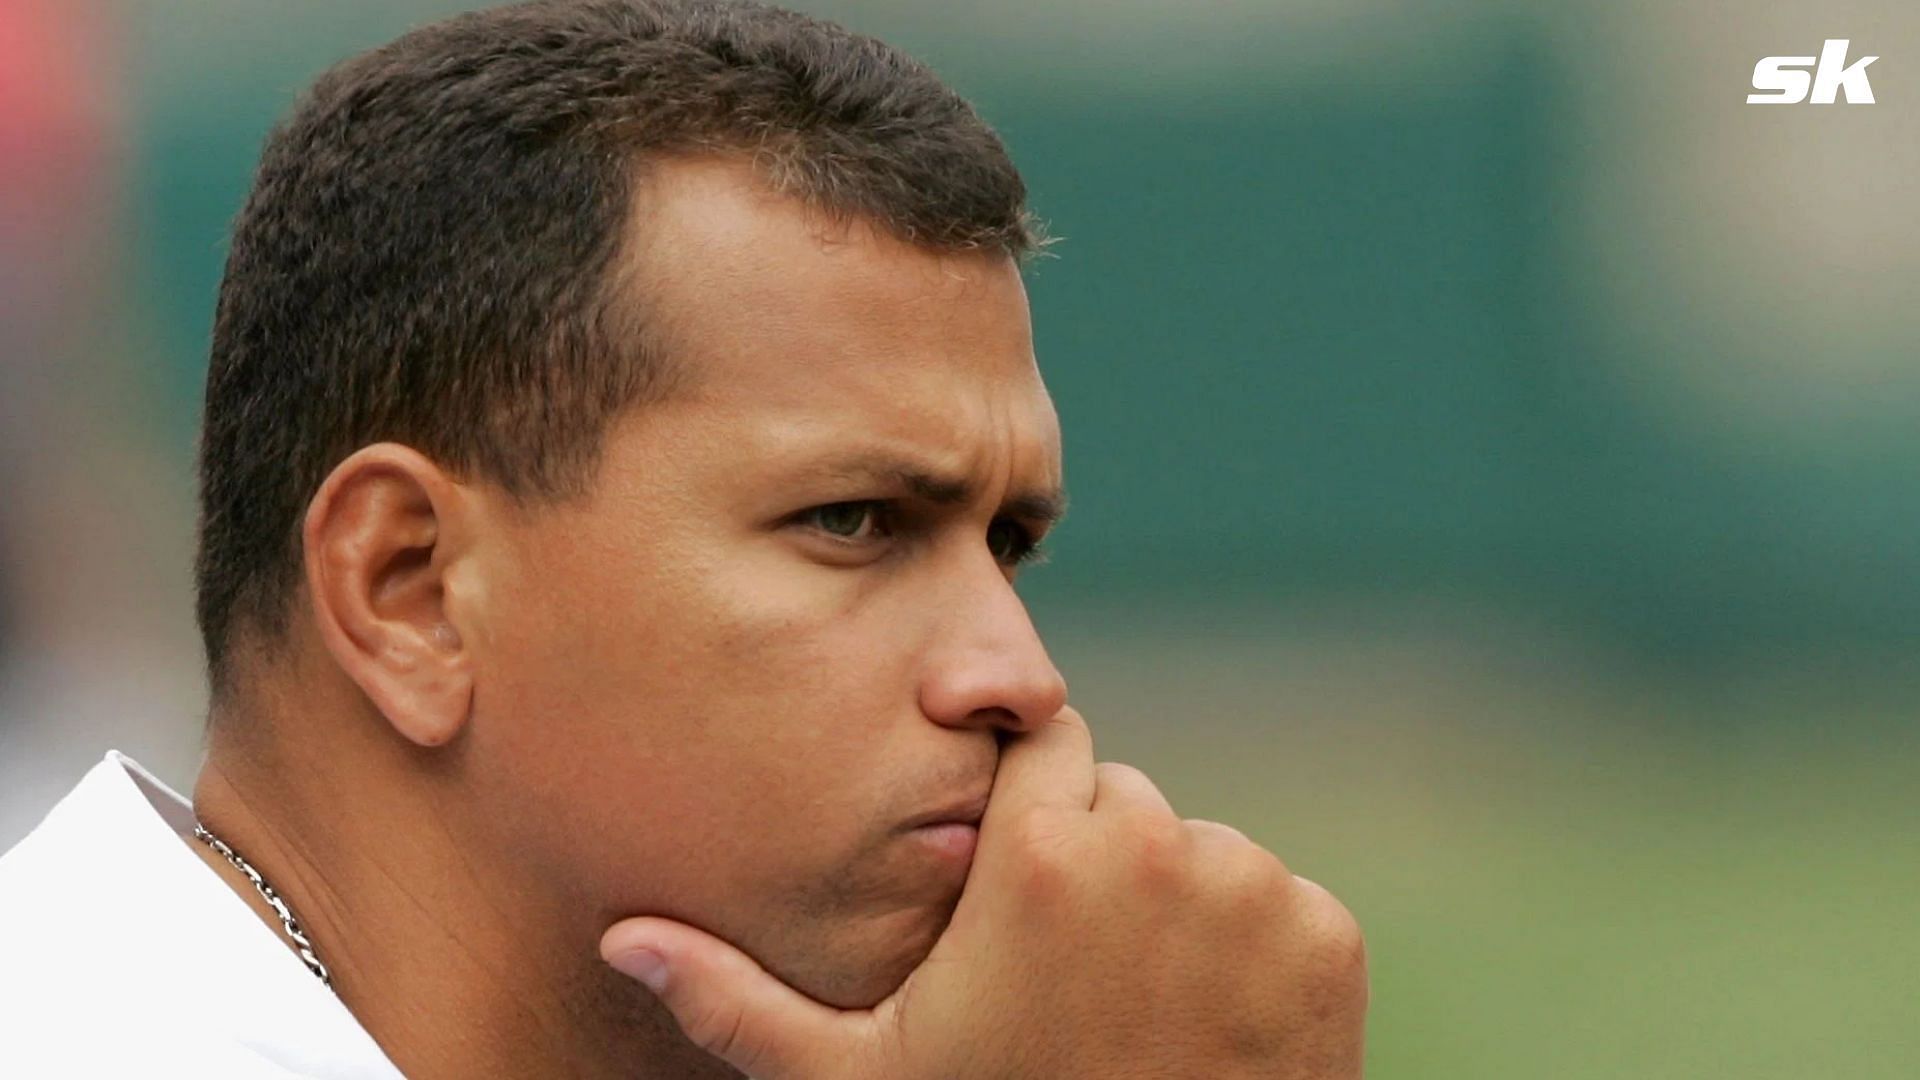 Donald Trump once advised Yankees to stop paying Alex Rodriguez for concealing his PED use from the organization